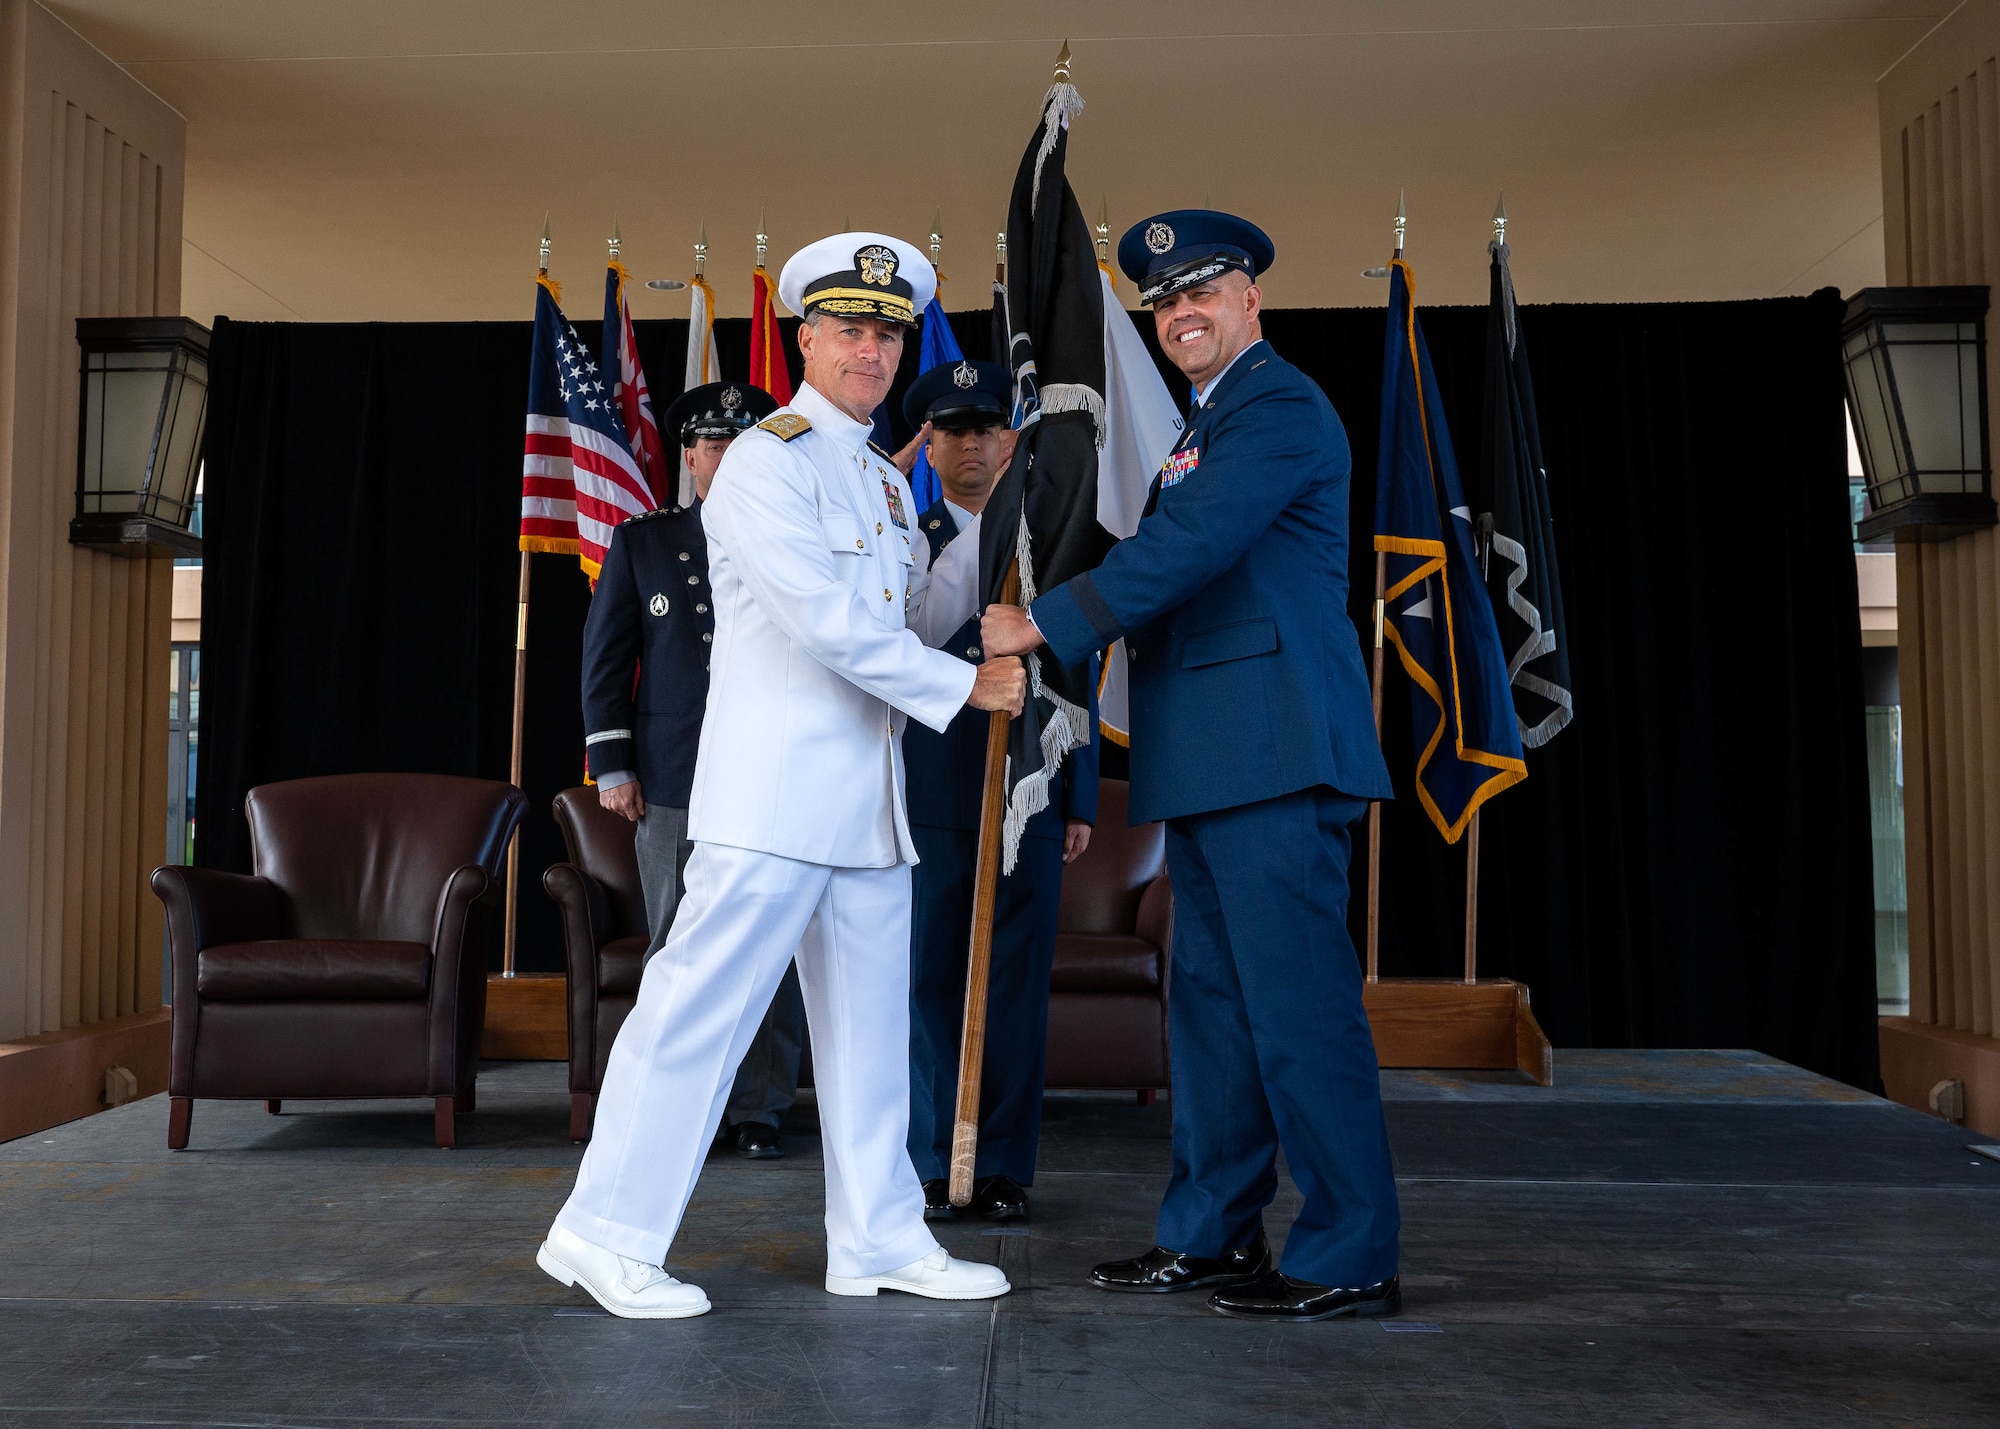 Adm. John C. Aquilino, Commander of U.S. Indo-Pacific Command, left, passes the United States Space Forces, Indo-Pacific, command flag to Brig. Gen. Anthony J. Mastalir, Commander of USSPACEFORINDOPAC, officiating his assumption of command during the USSPACEFORINDOPAC activation ceremony hosted by USINDOPACOM. USSPACEFORINDOPAC will serve as the space-domain authority to USINDOPACOM, advancing the capabilities of the joint force and promoting a free and open Indo-Pacific. (U.S. Navy photo by Mass Communication Specialist 1st Class Anthony J. Rivera)